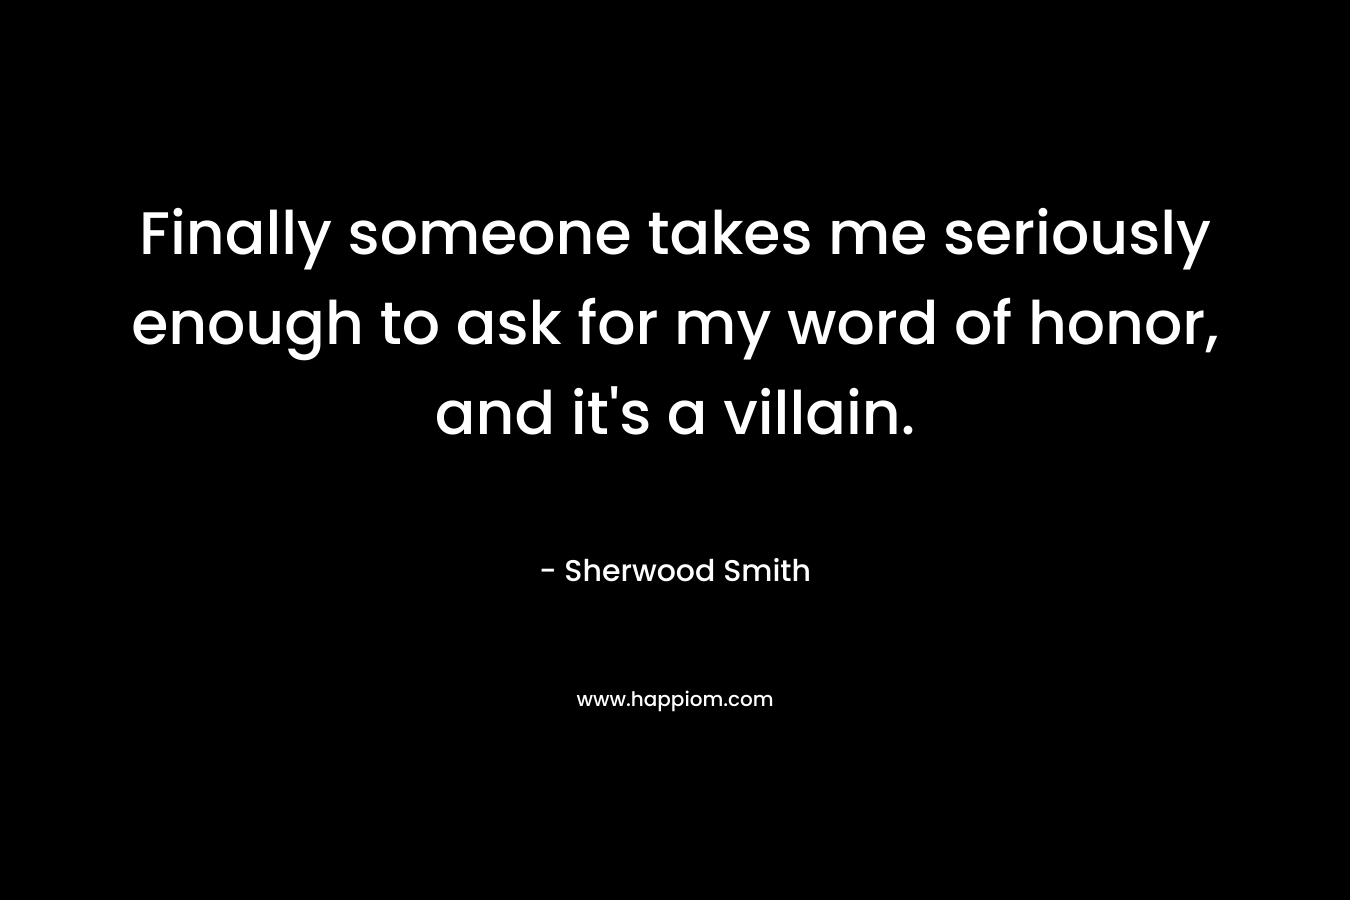 Finally someone takes me seriously enough to ask for my word of honor, and it’s a villain. – Sherwood Smith